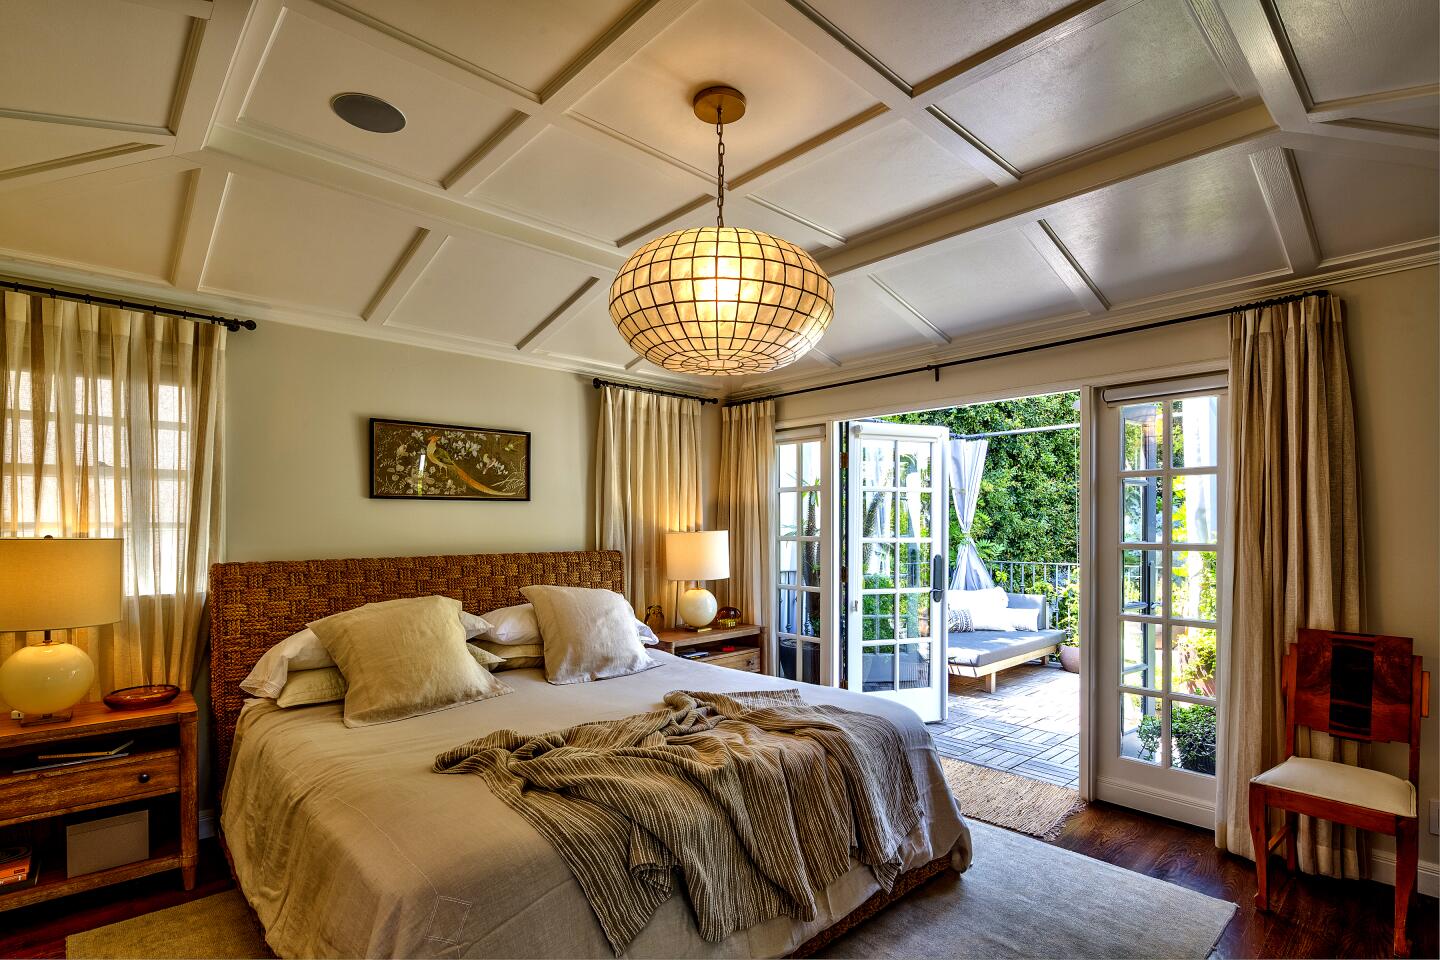 Upstairs, the master suite opens to a private garden balcony.